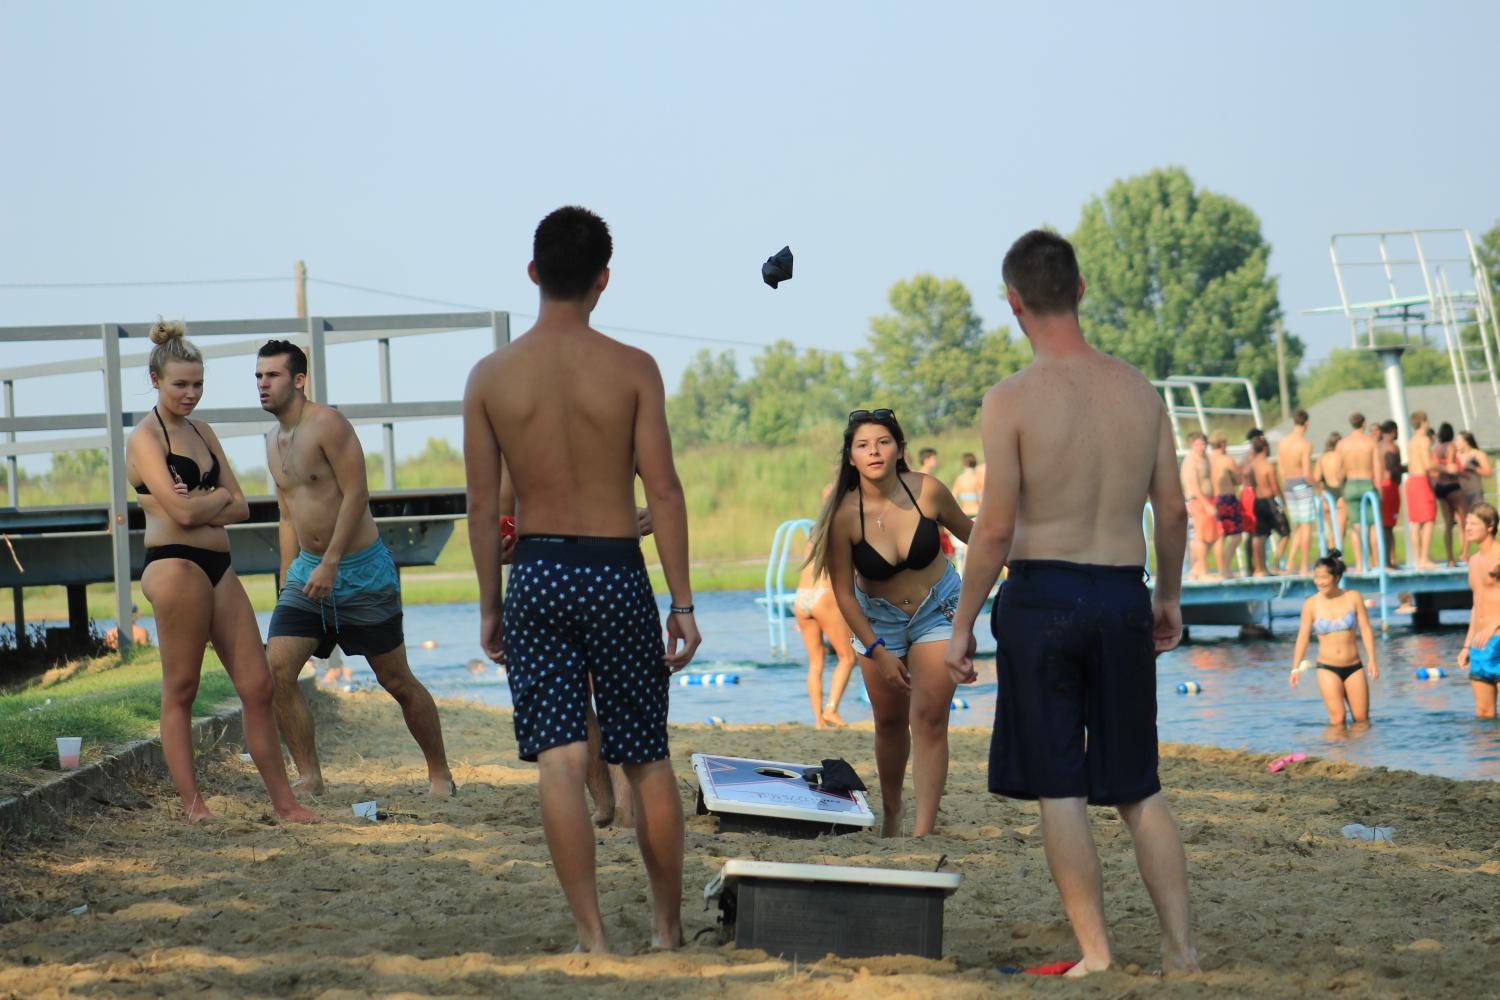 Students blasted music from a single speaker as they played game after game of Cornhole at Labor Day at the Lake Monday afternoon. Students enjoyed a variety of other games such as beach volleyball and soccer.  